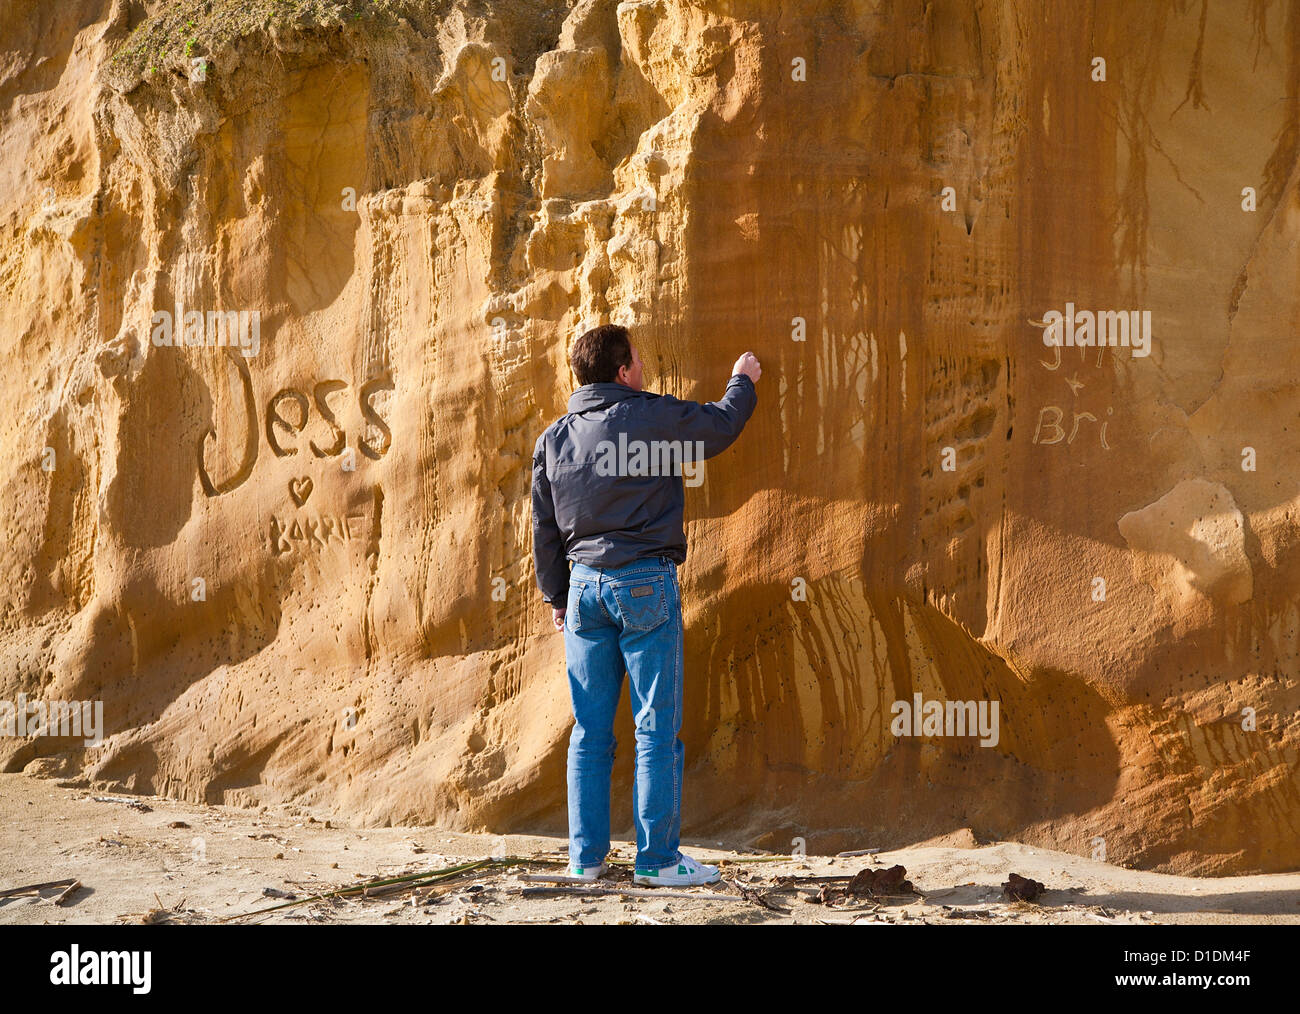 A man carving graffiti into the sandstone rocks, cliffs, at Baylys Beach, Northland, North Island, New Zealand Stock Photo